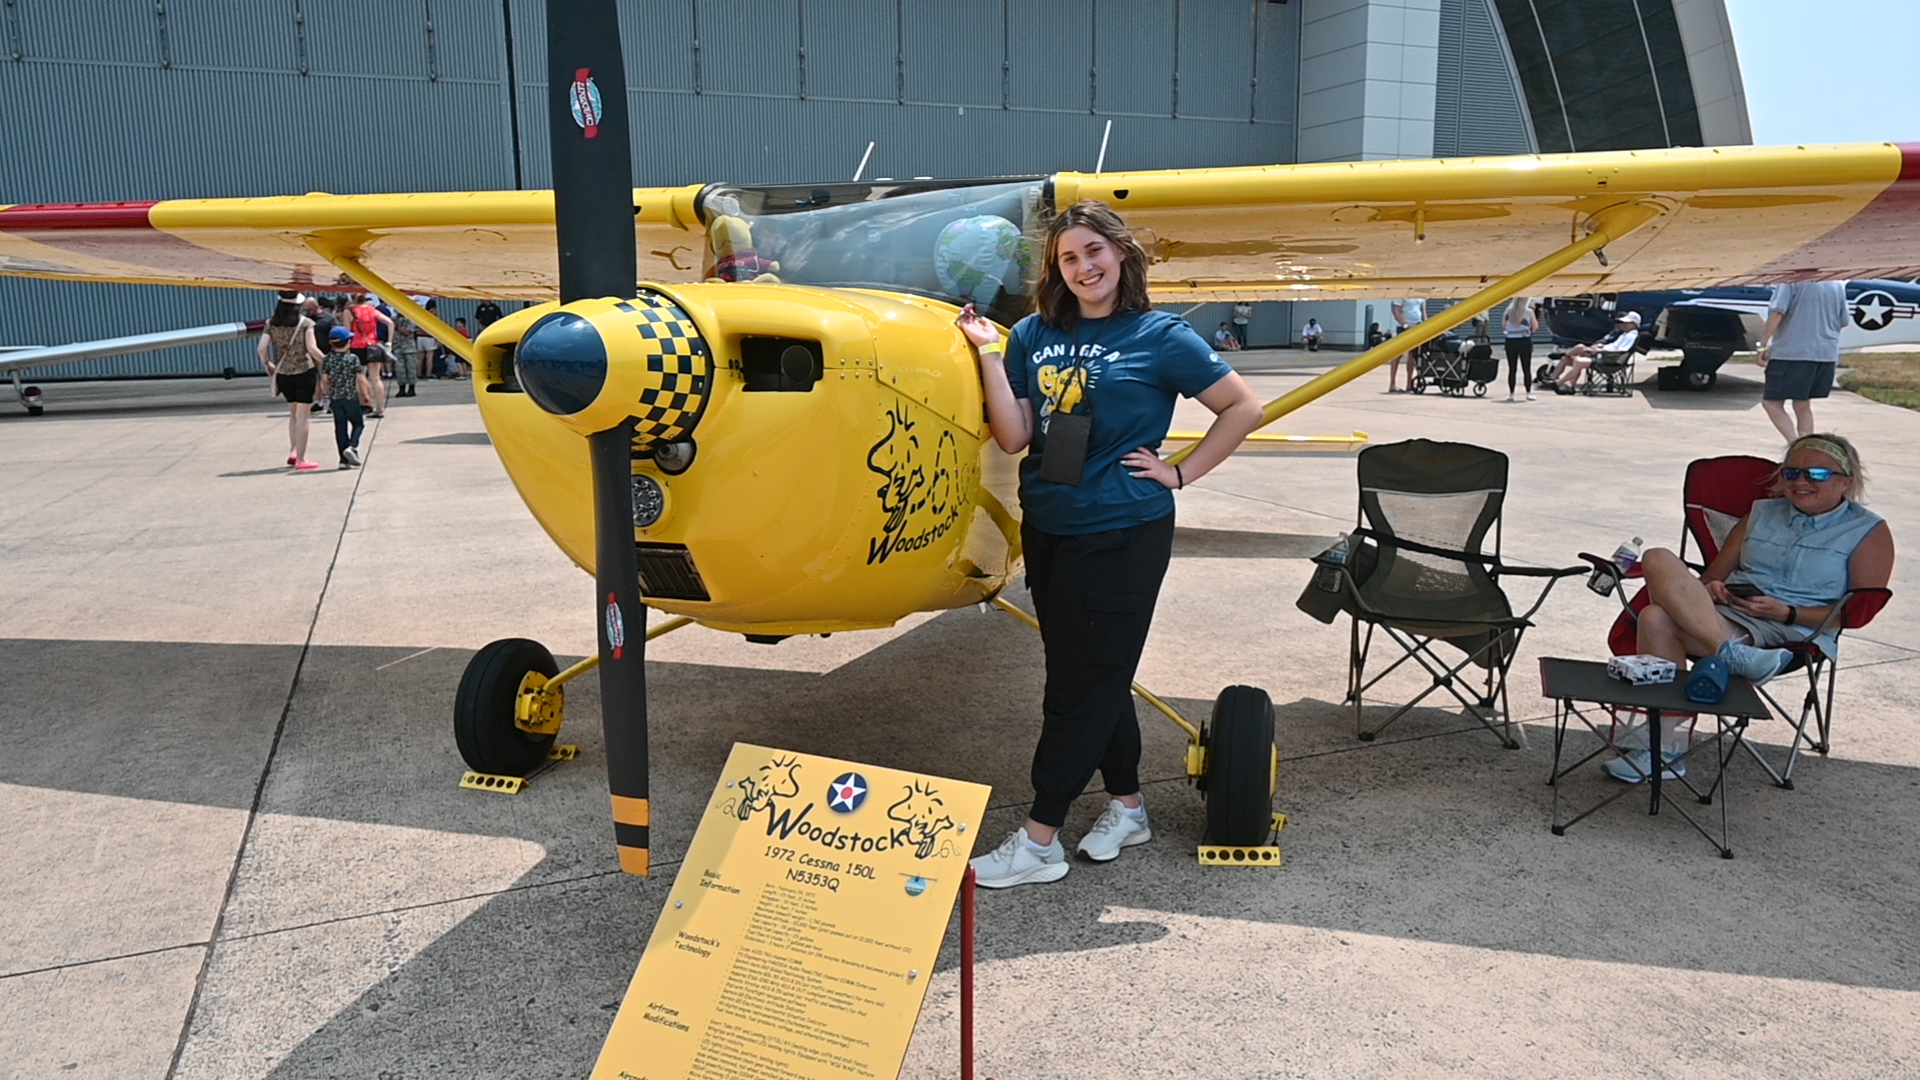 Cameron Gordon standing in front of a yellow airplane